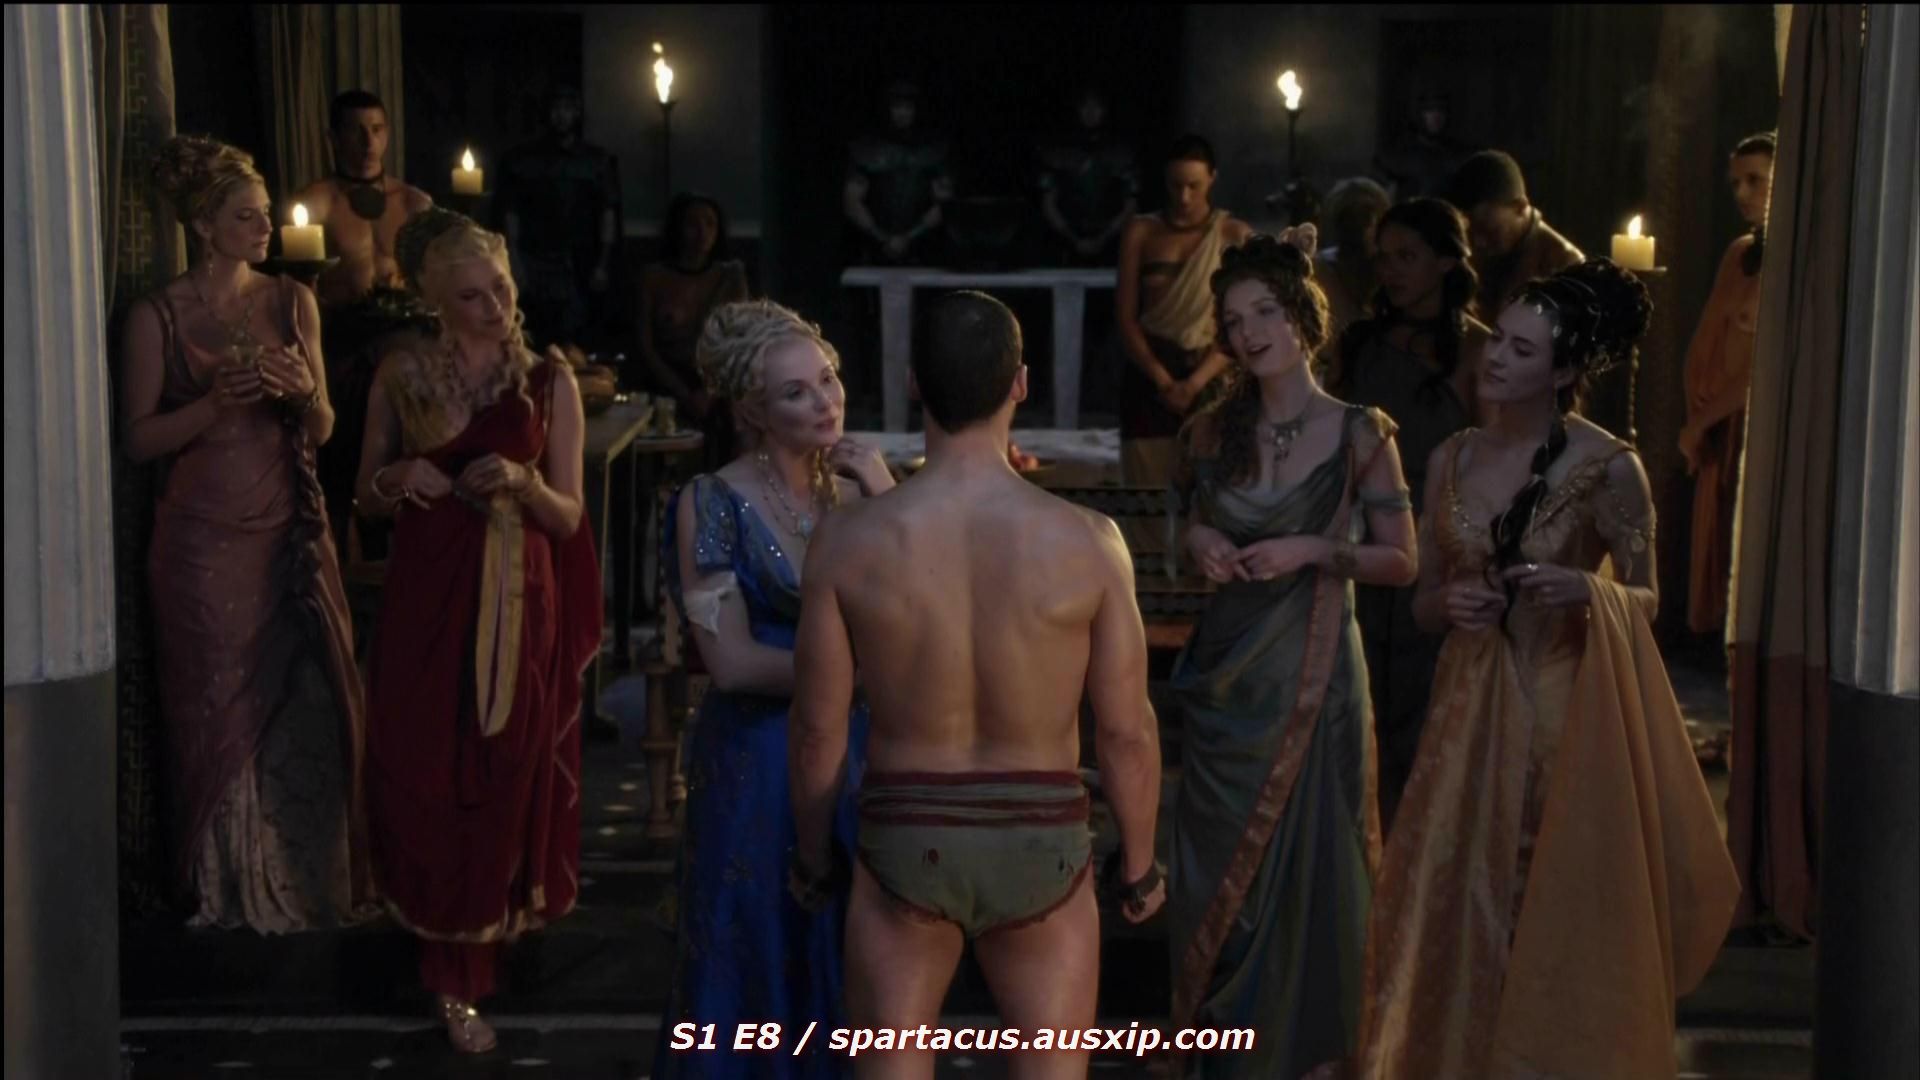 Lucy Lawless, Brooke Harman, Andy Whitfield, Mia Pistorius, Viva Bianca, Tania Nolan and Lesley-Ann Brandt in Spartacus: Blood and Sand (2010)